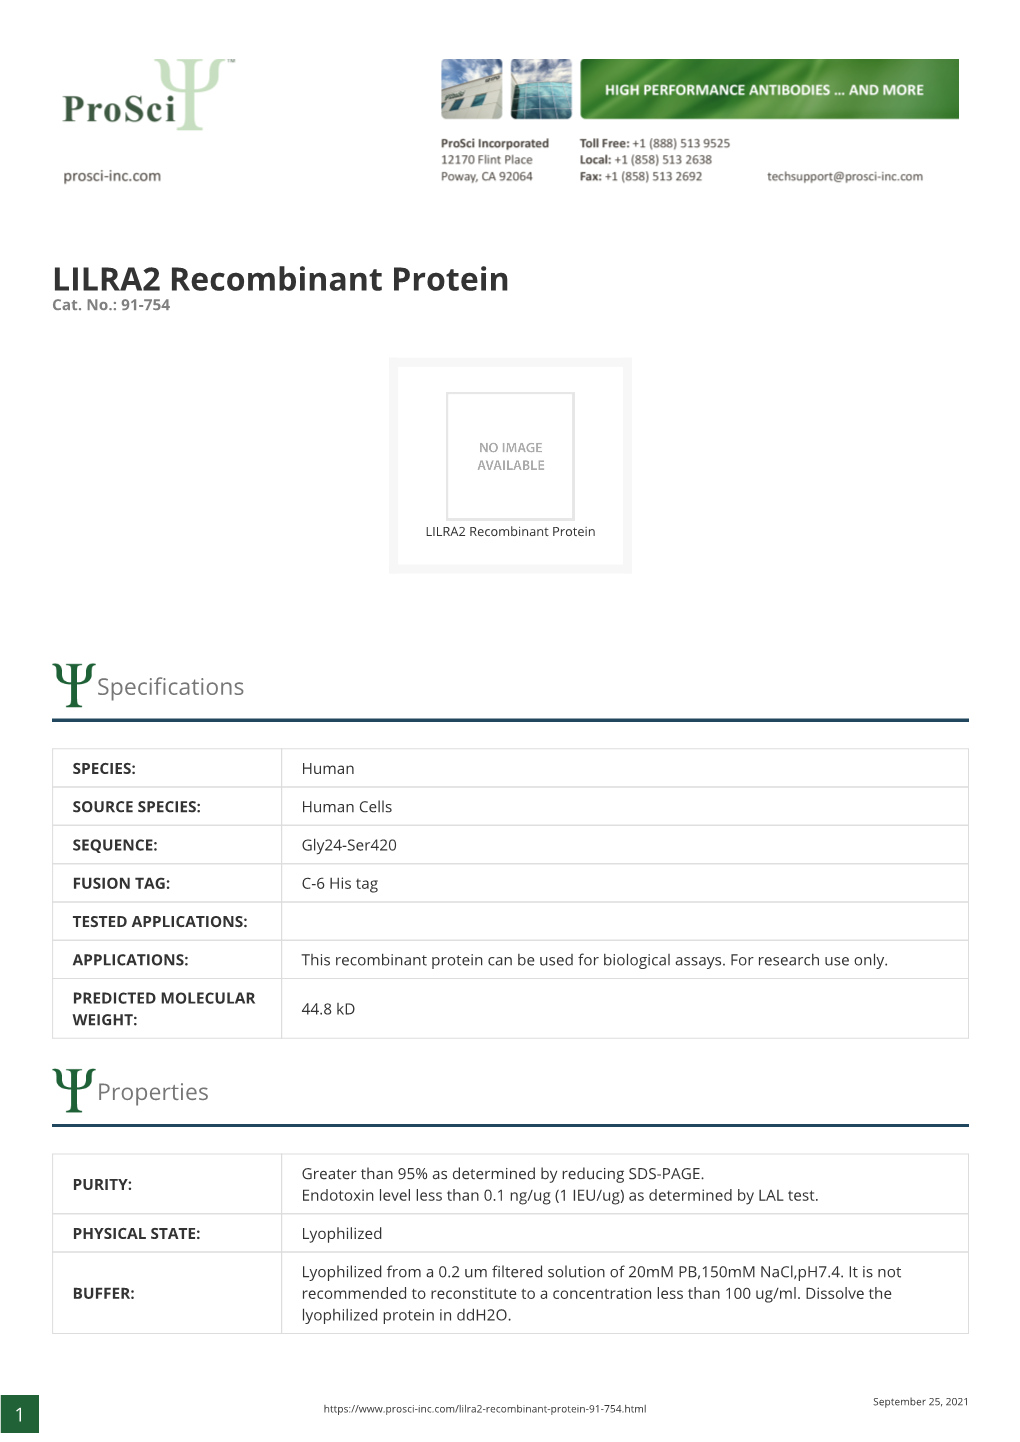 LILRA2 Recombinant Protein Cat